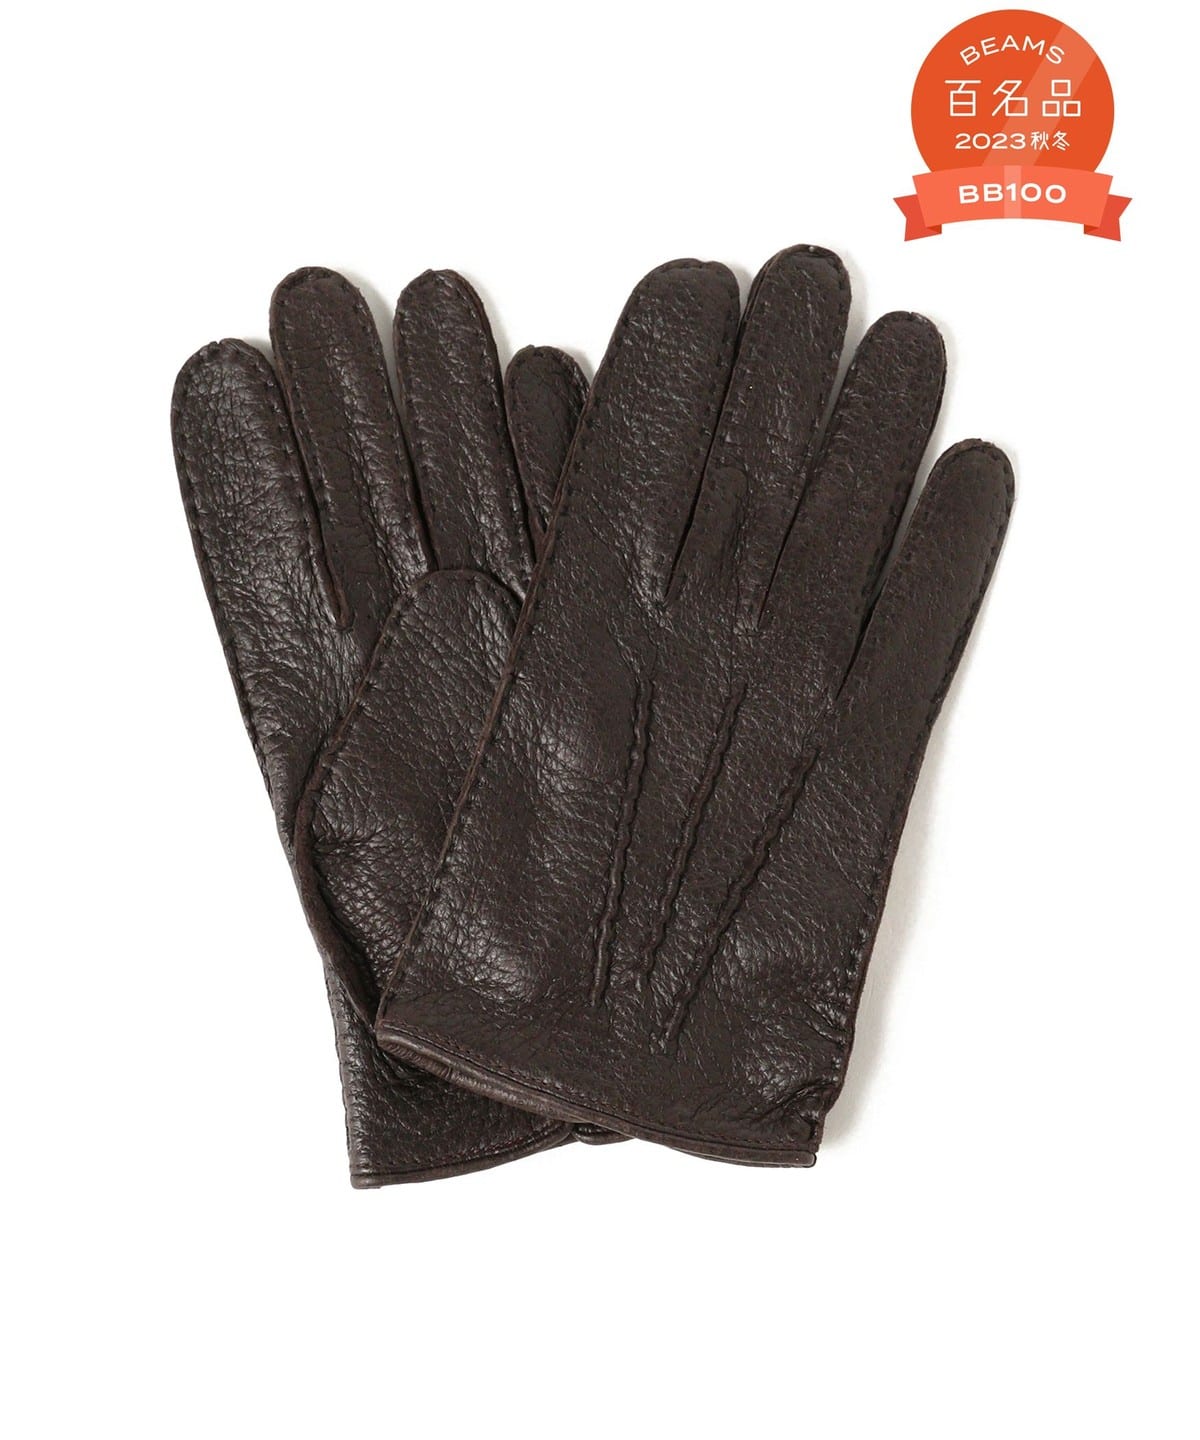 BEAMS F F DENTS / Unlined peccary leather gloves (fashion 